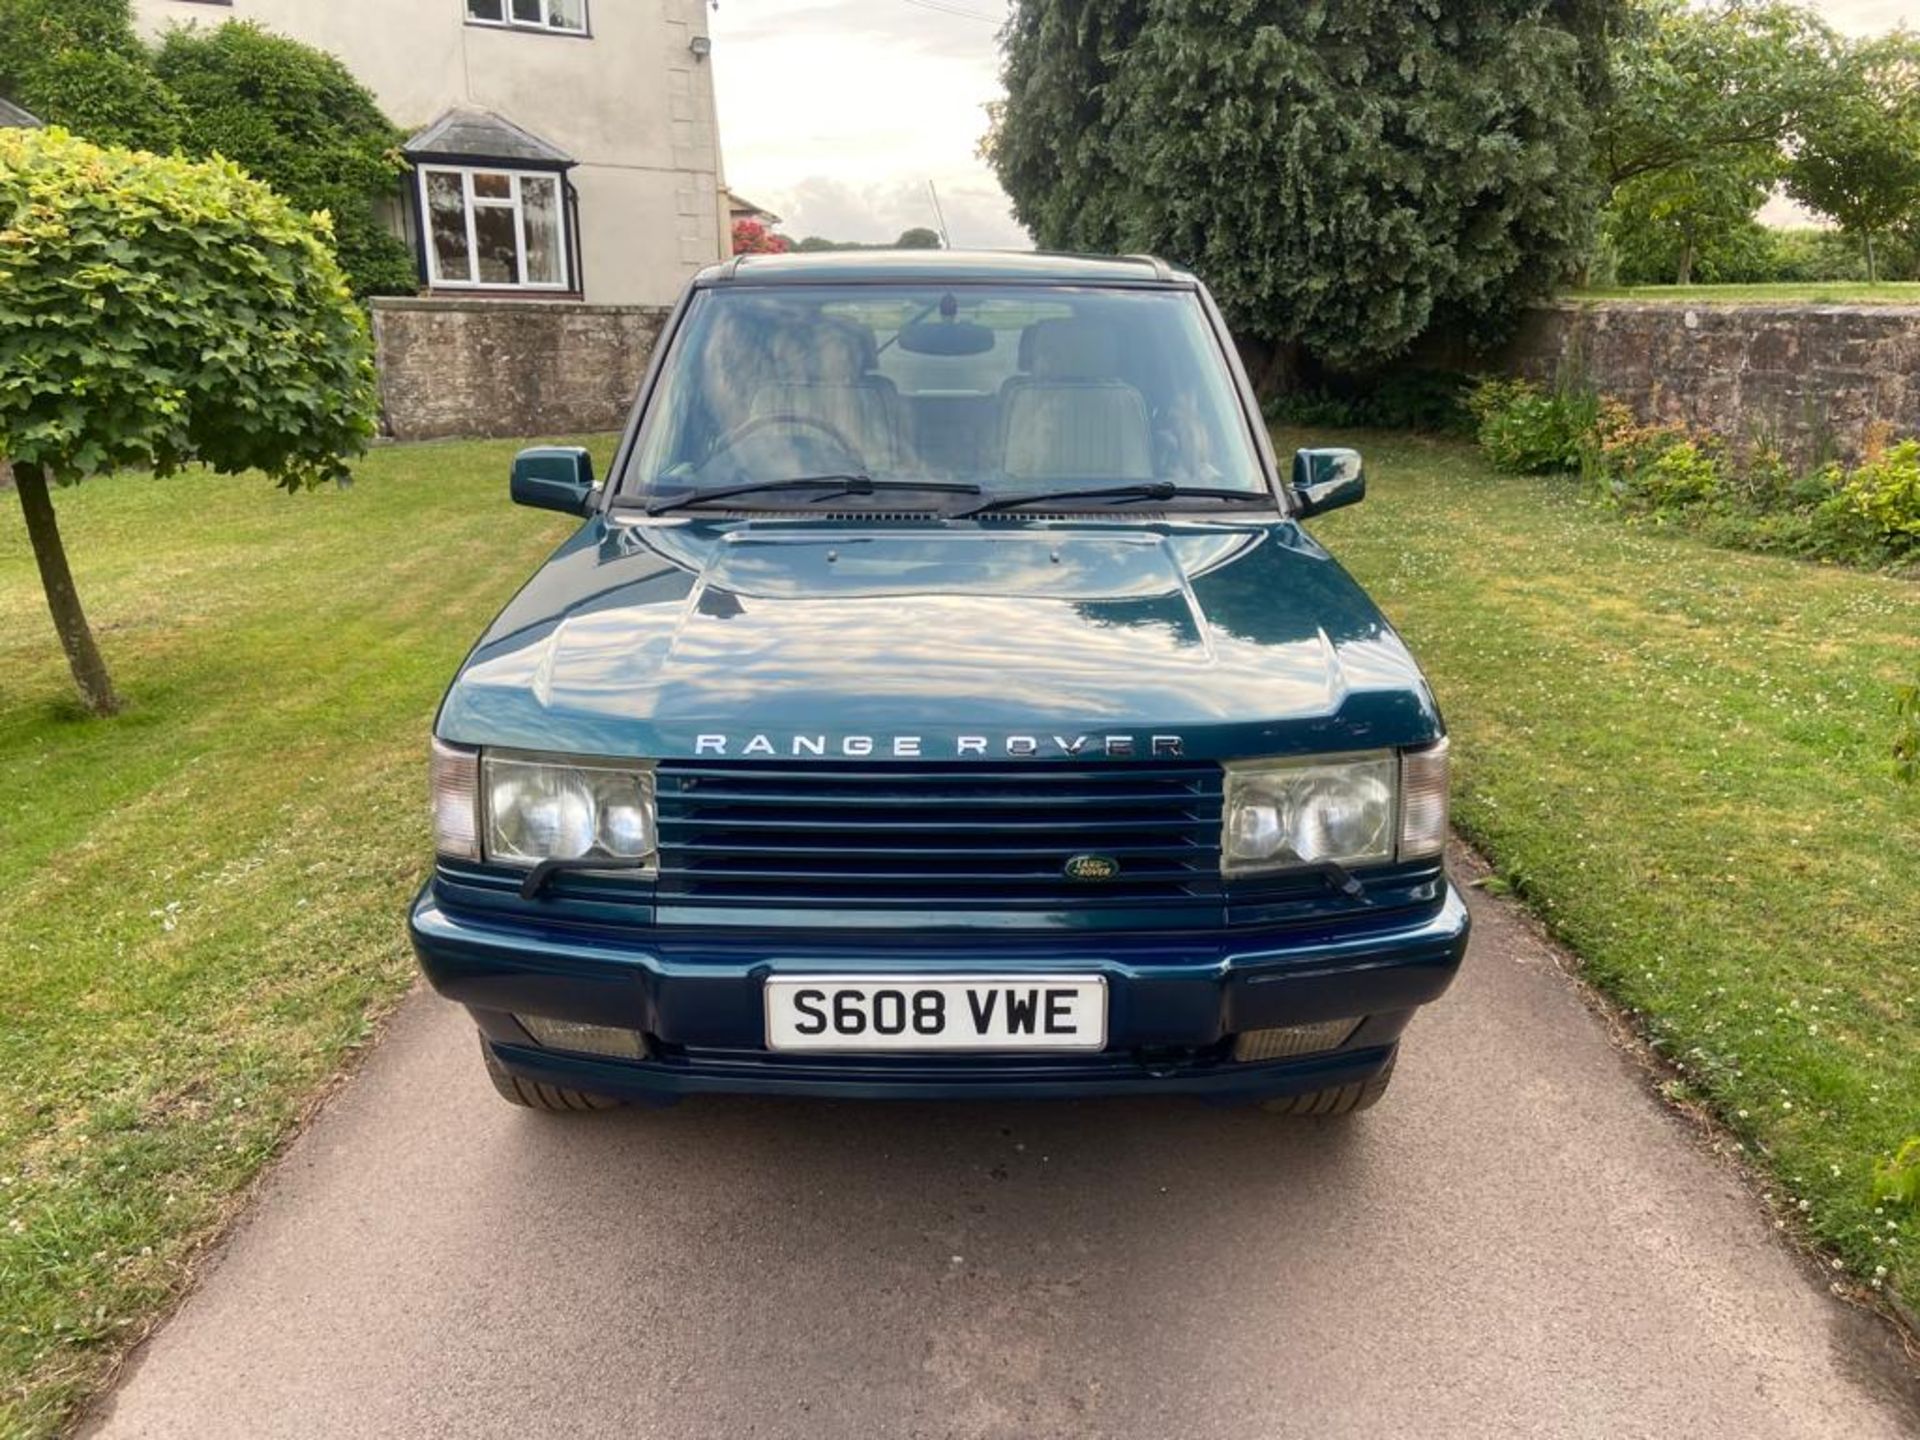 1998 Limited Edition Range Rover P38 - Image 35 of 39